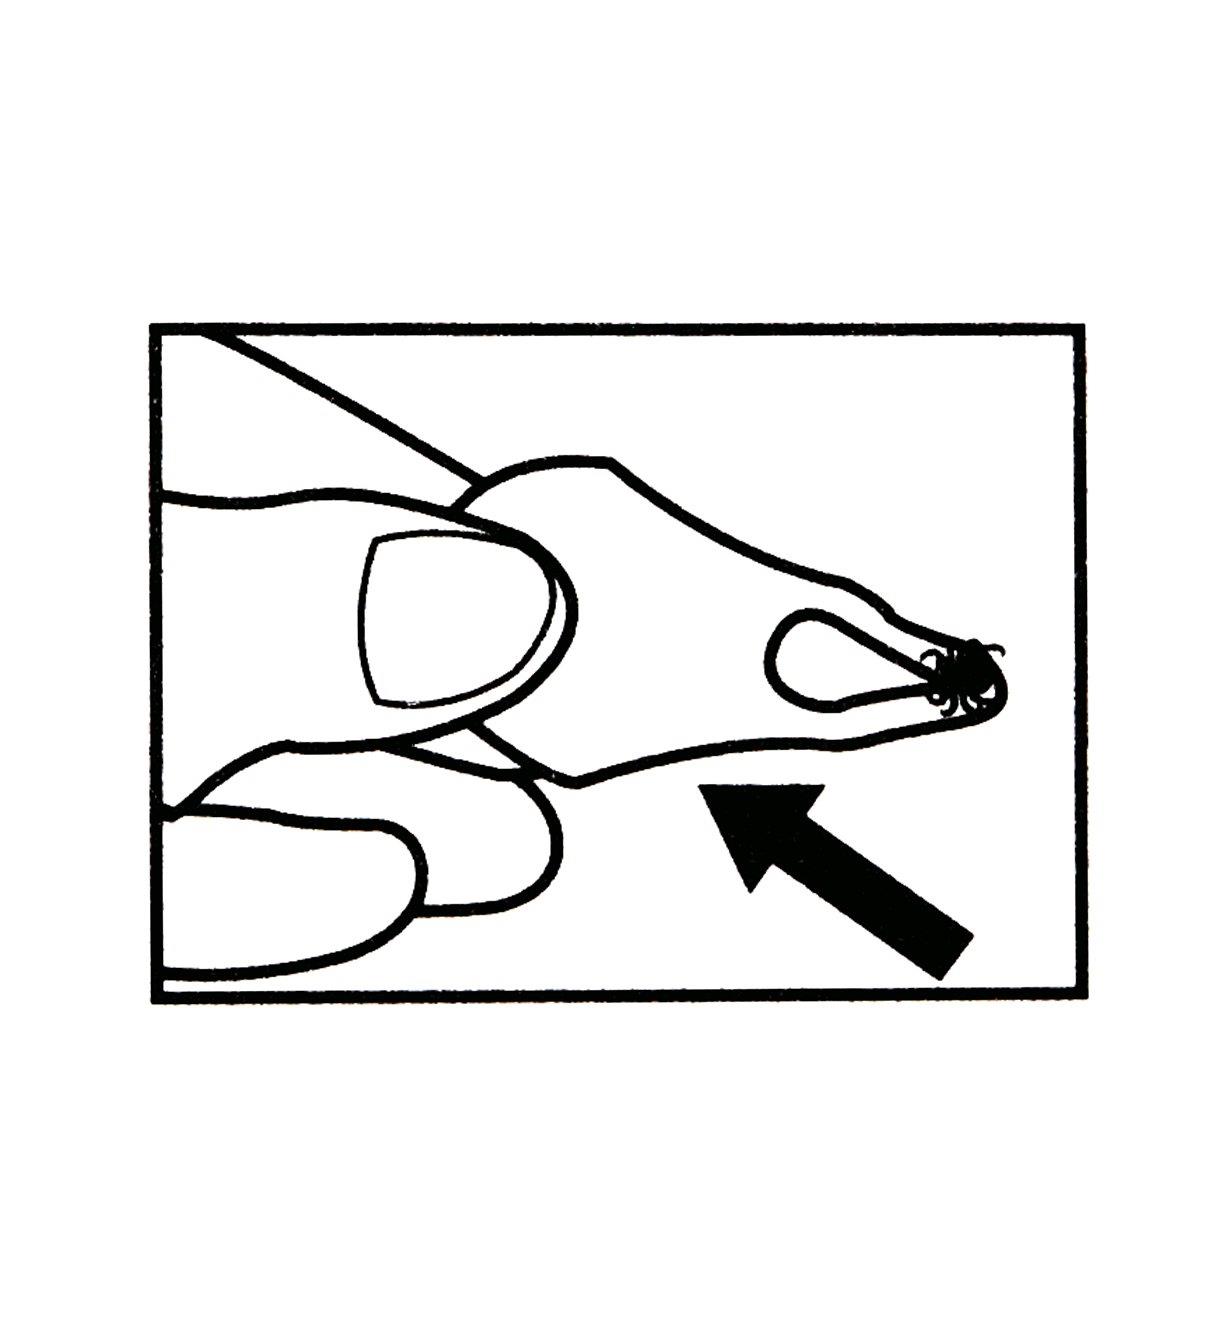 Illustration shows how to pull the tick key away from the skin and remove the tick